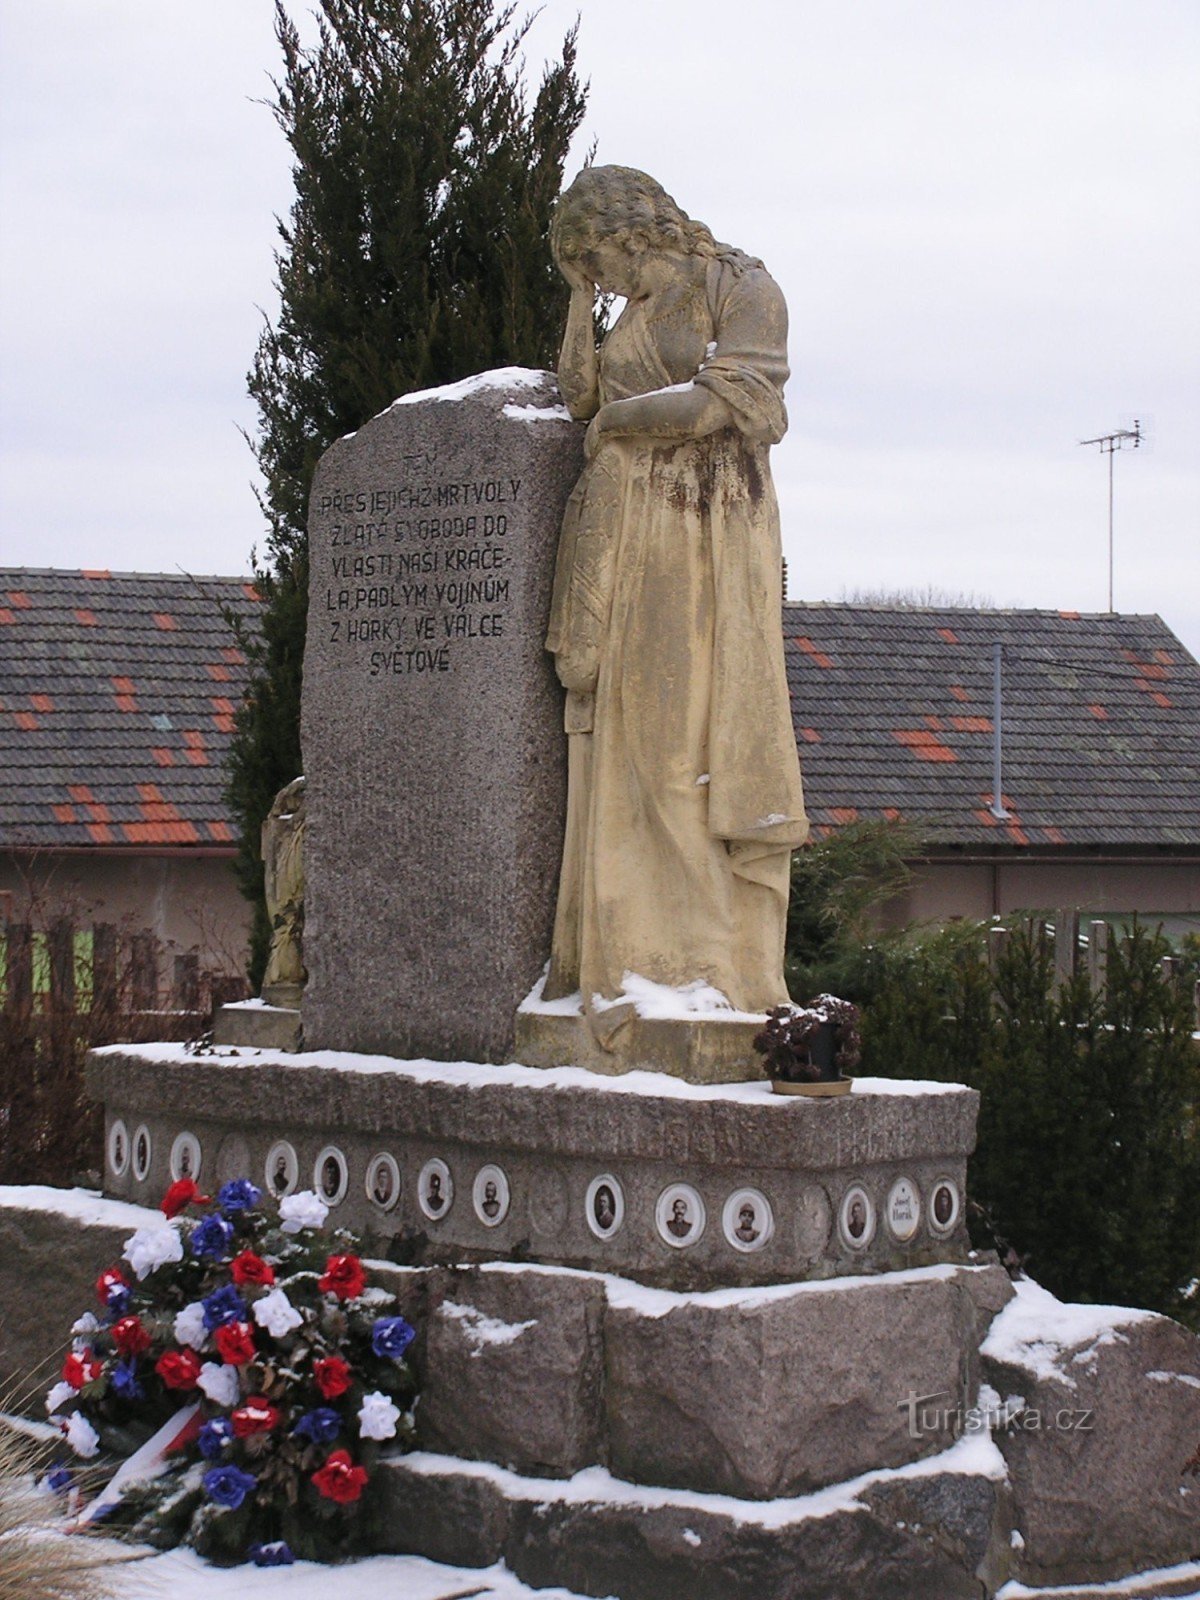 Horka - monument to the fallen